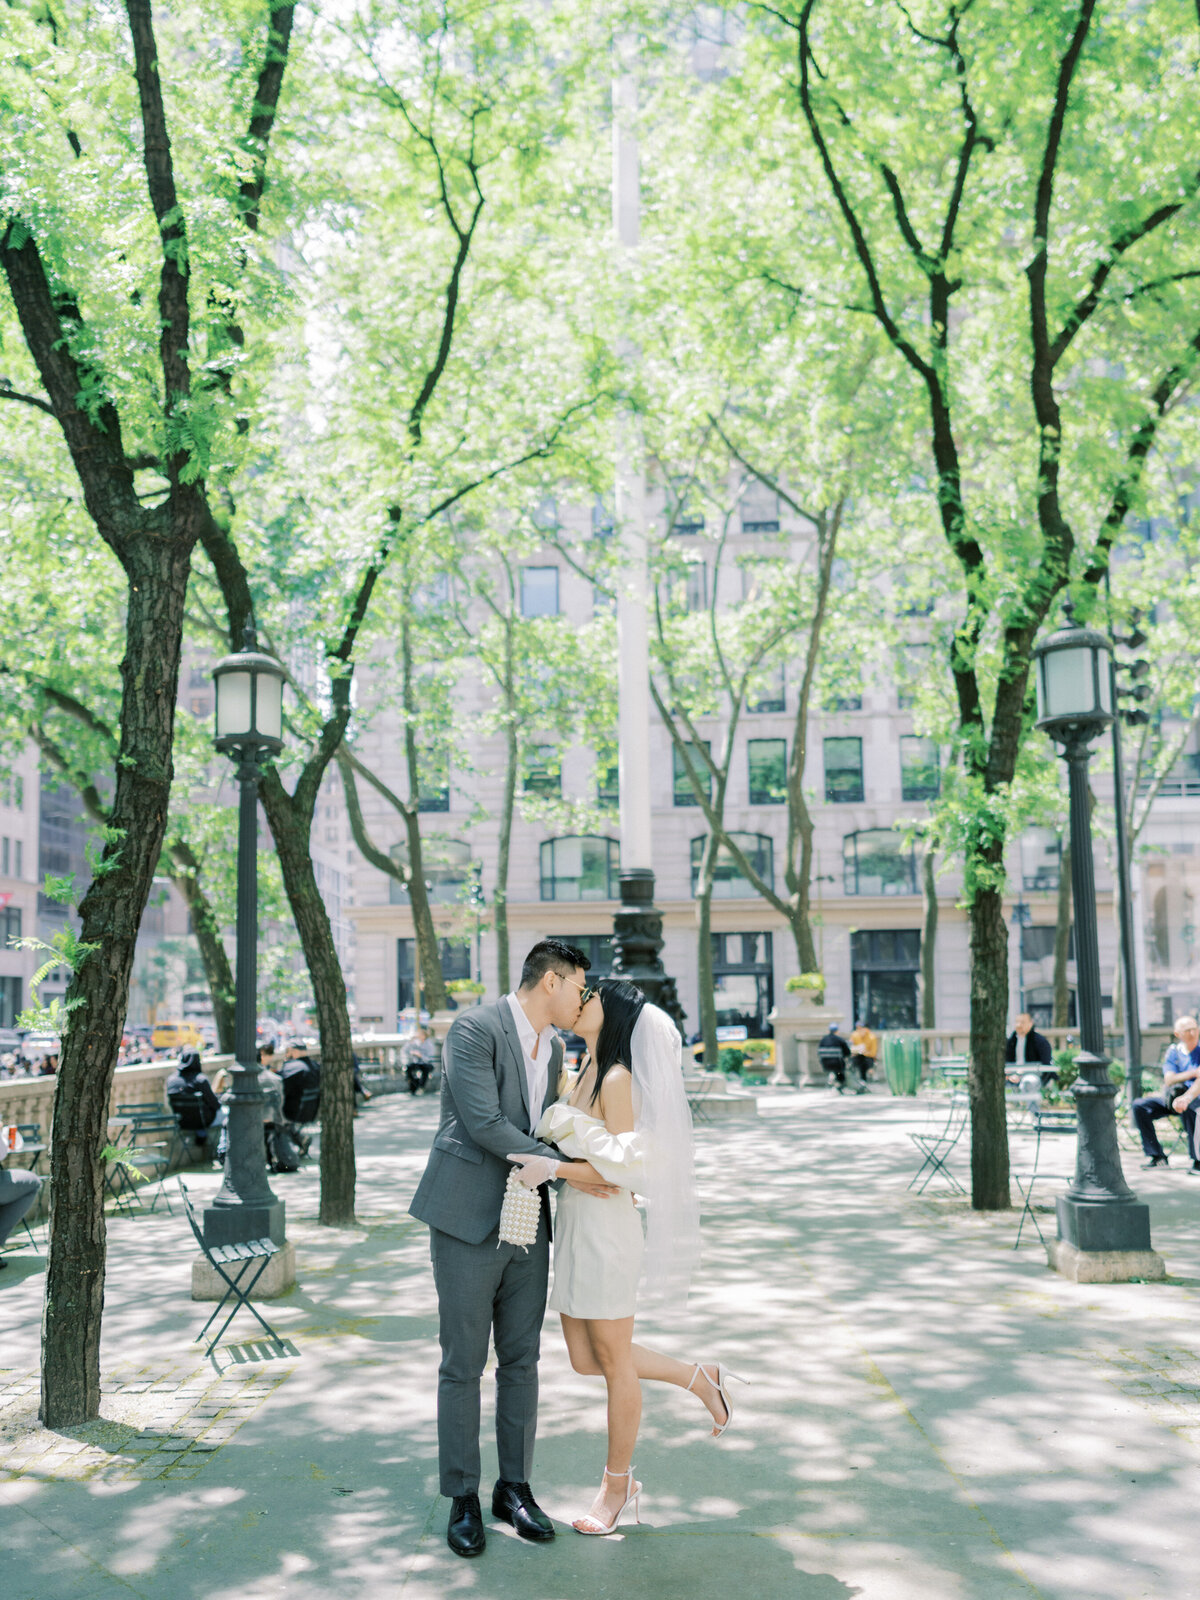 Vogue Editiorial NYC Elopement Themed Engagement Session Highlights | Amarachi Ikeji Photography 03